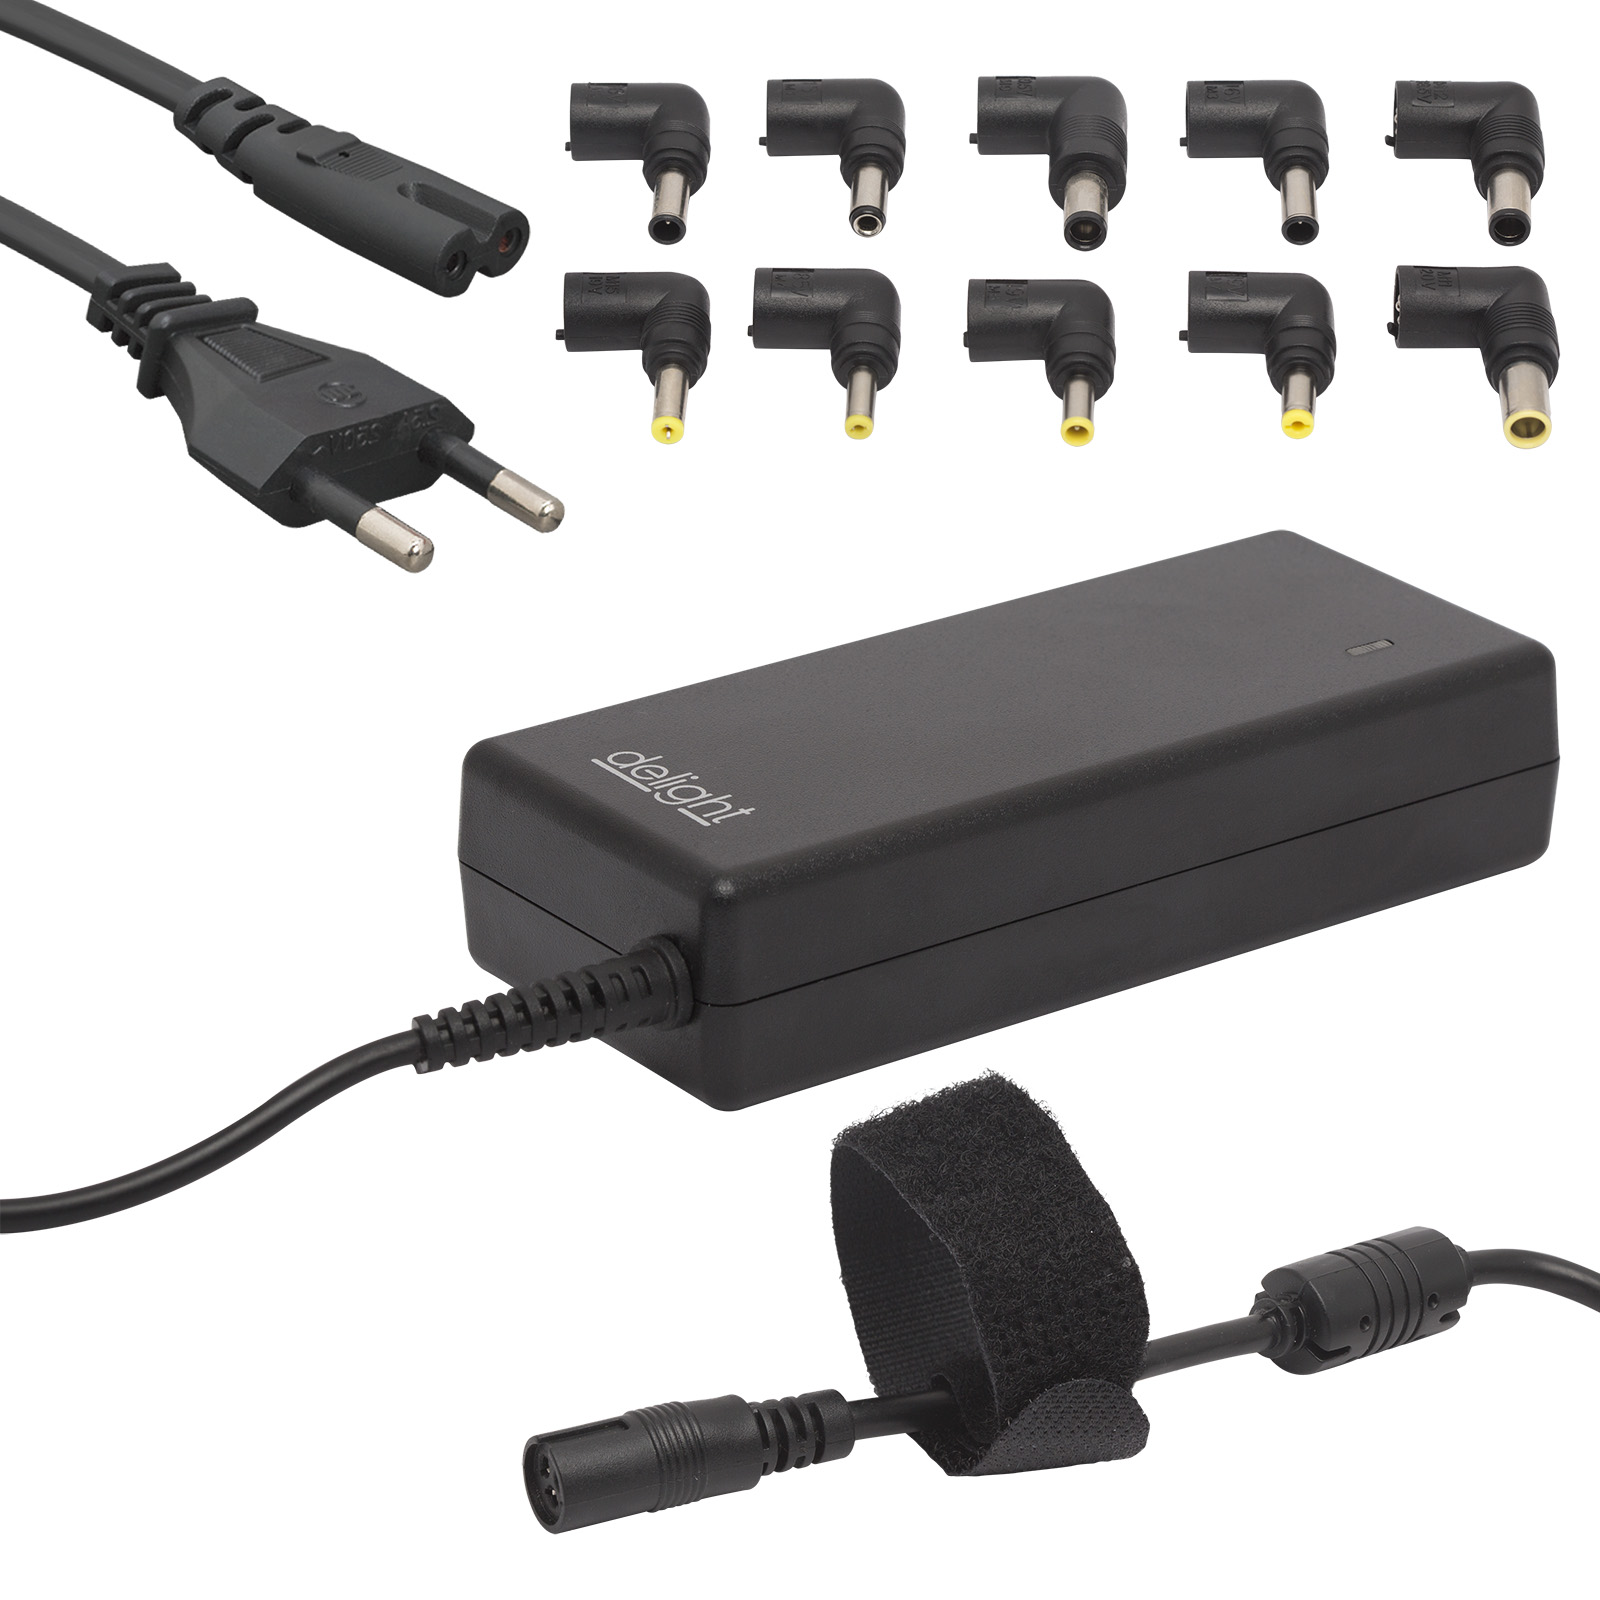 Universal laptop/notebook adapter with power cable thumb